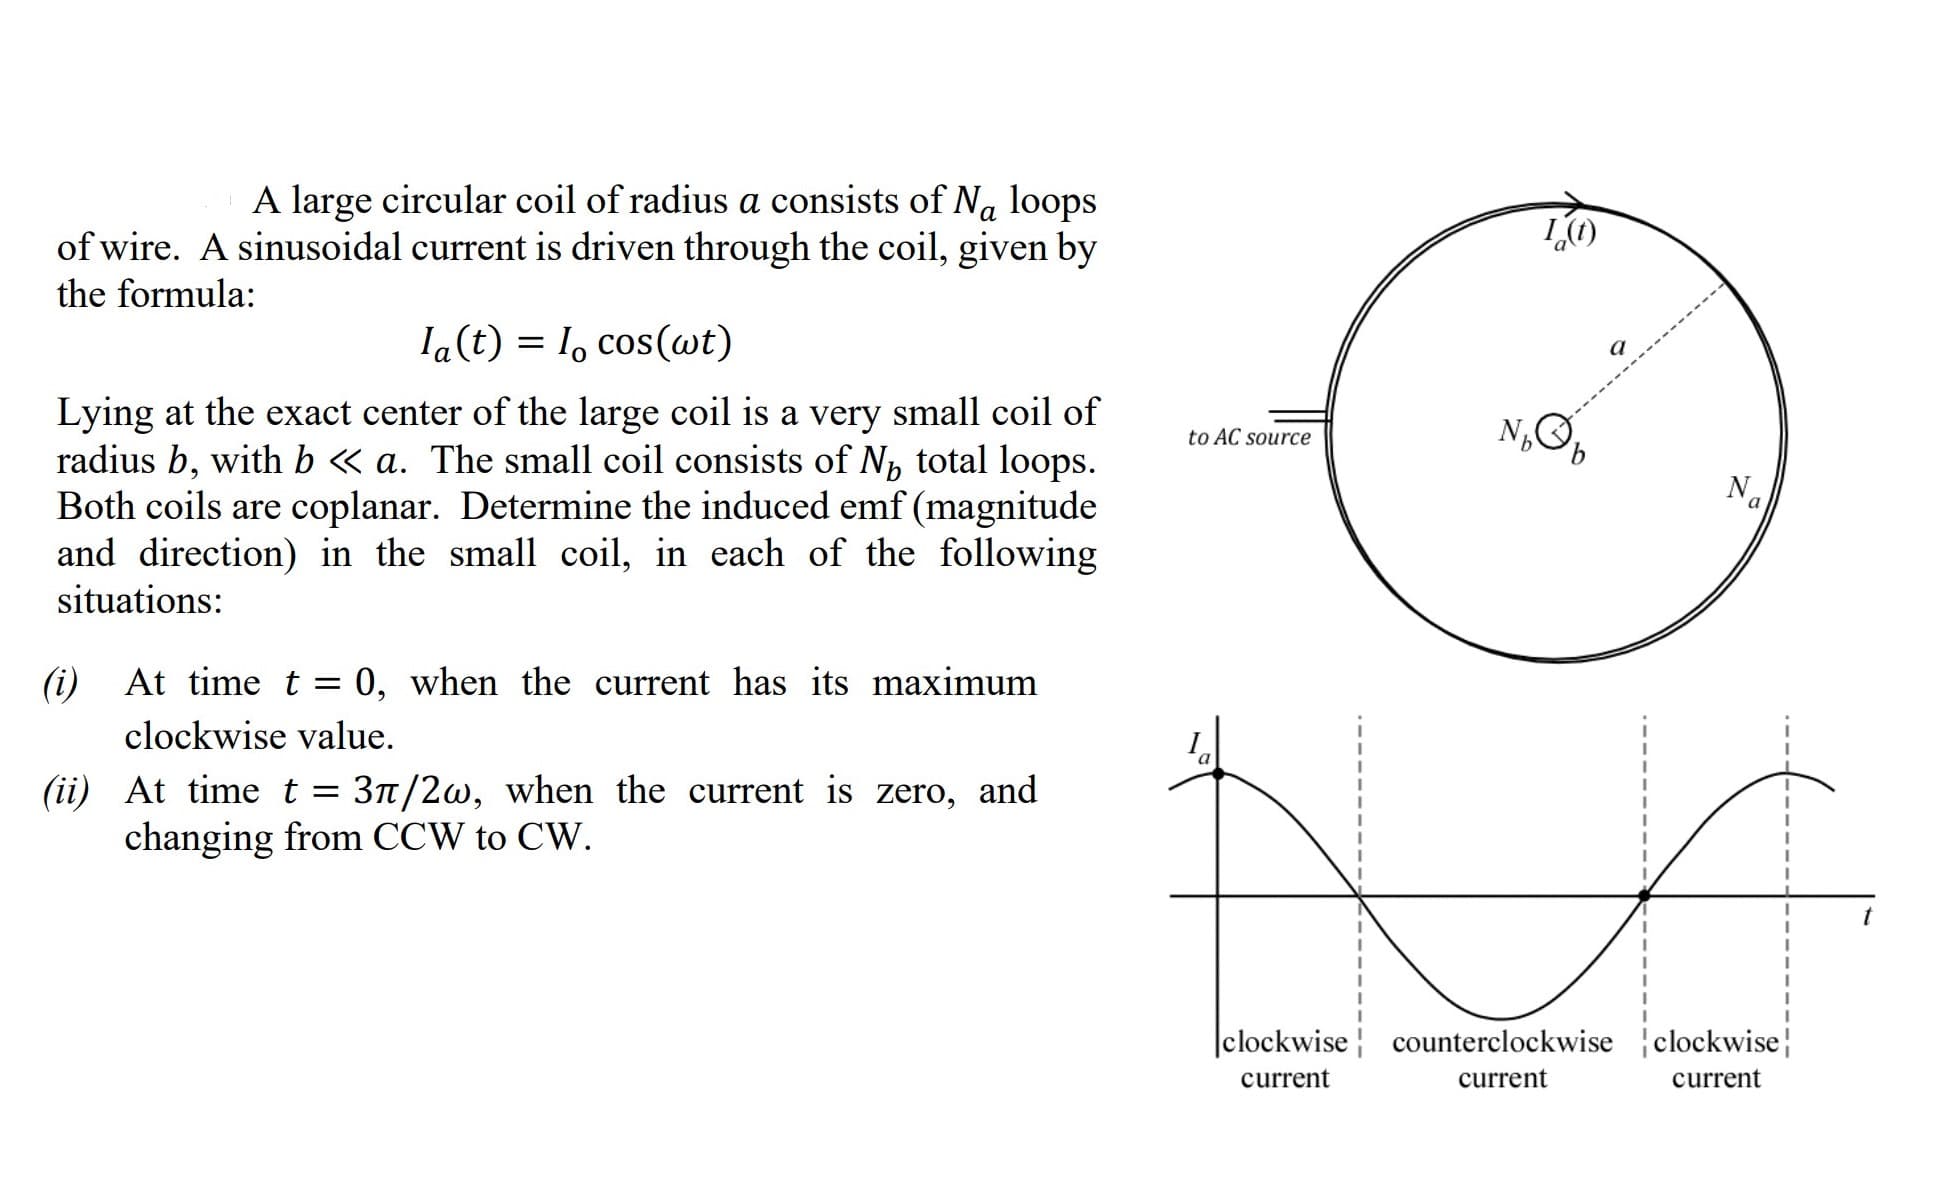 A large circular coil of radius a consists of Na loops
of wire. A sinusoidal current is driven through the coil, given by
L(1)
the formula:
Ia(t) = 1, cos(awt)
Lying at the exact center of the large coil is a very small coil of
radius b, with b « a. The small coil consists of Np total loops.
Both coils are coplanar. Determine the induced emf (magnitude
and direction) in the small coil, in each of the following
situations:
Ng
to AC source
(i) At timet = 0, when the current has its maximum
clockwise value.
(ii) At time t =
changing from CCW to CW.
3n/2w, when the current is zero, and
|clockwise counterclockwise clockwise
current
current
current
